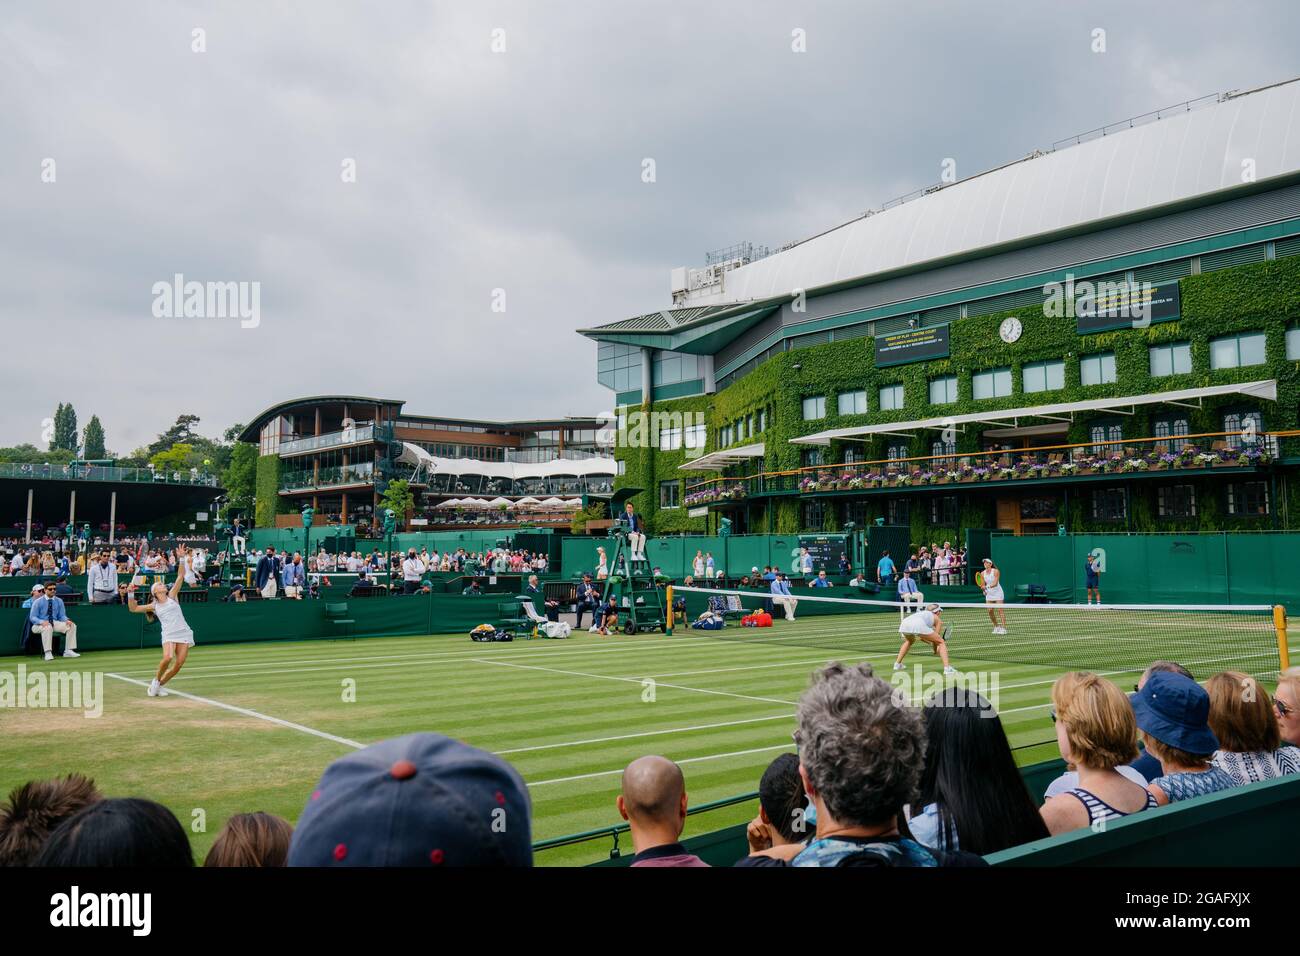 General views of A. Krunic and N. Stojanovic of Serbia takes on H. Carter of the USA and L. Stefani of Brazil at Wimbledon with Centre Court behind Stock Photo